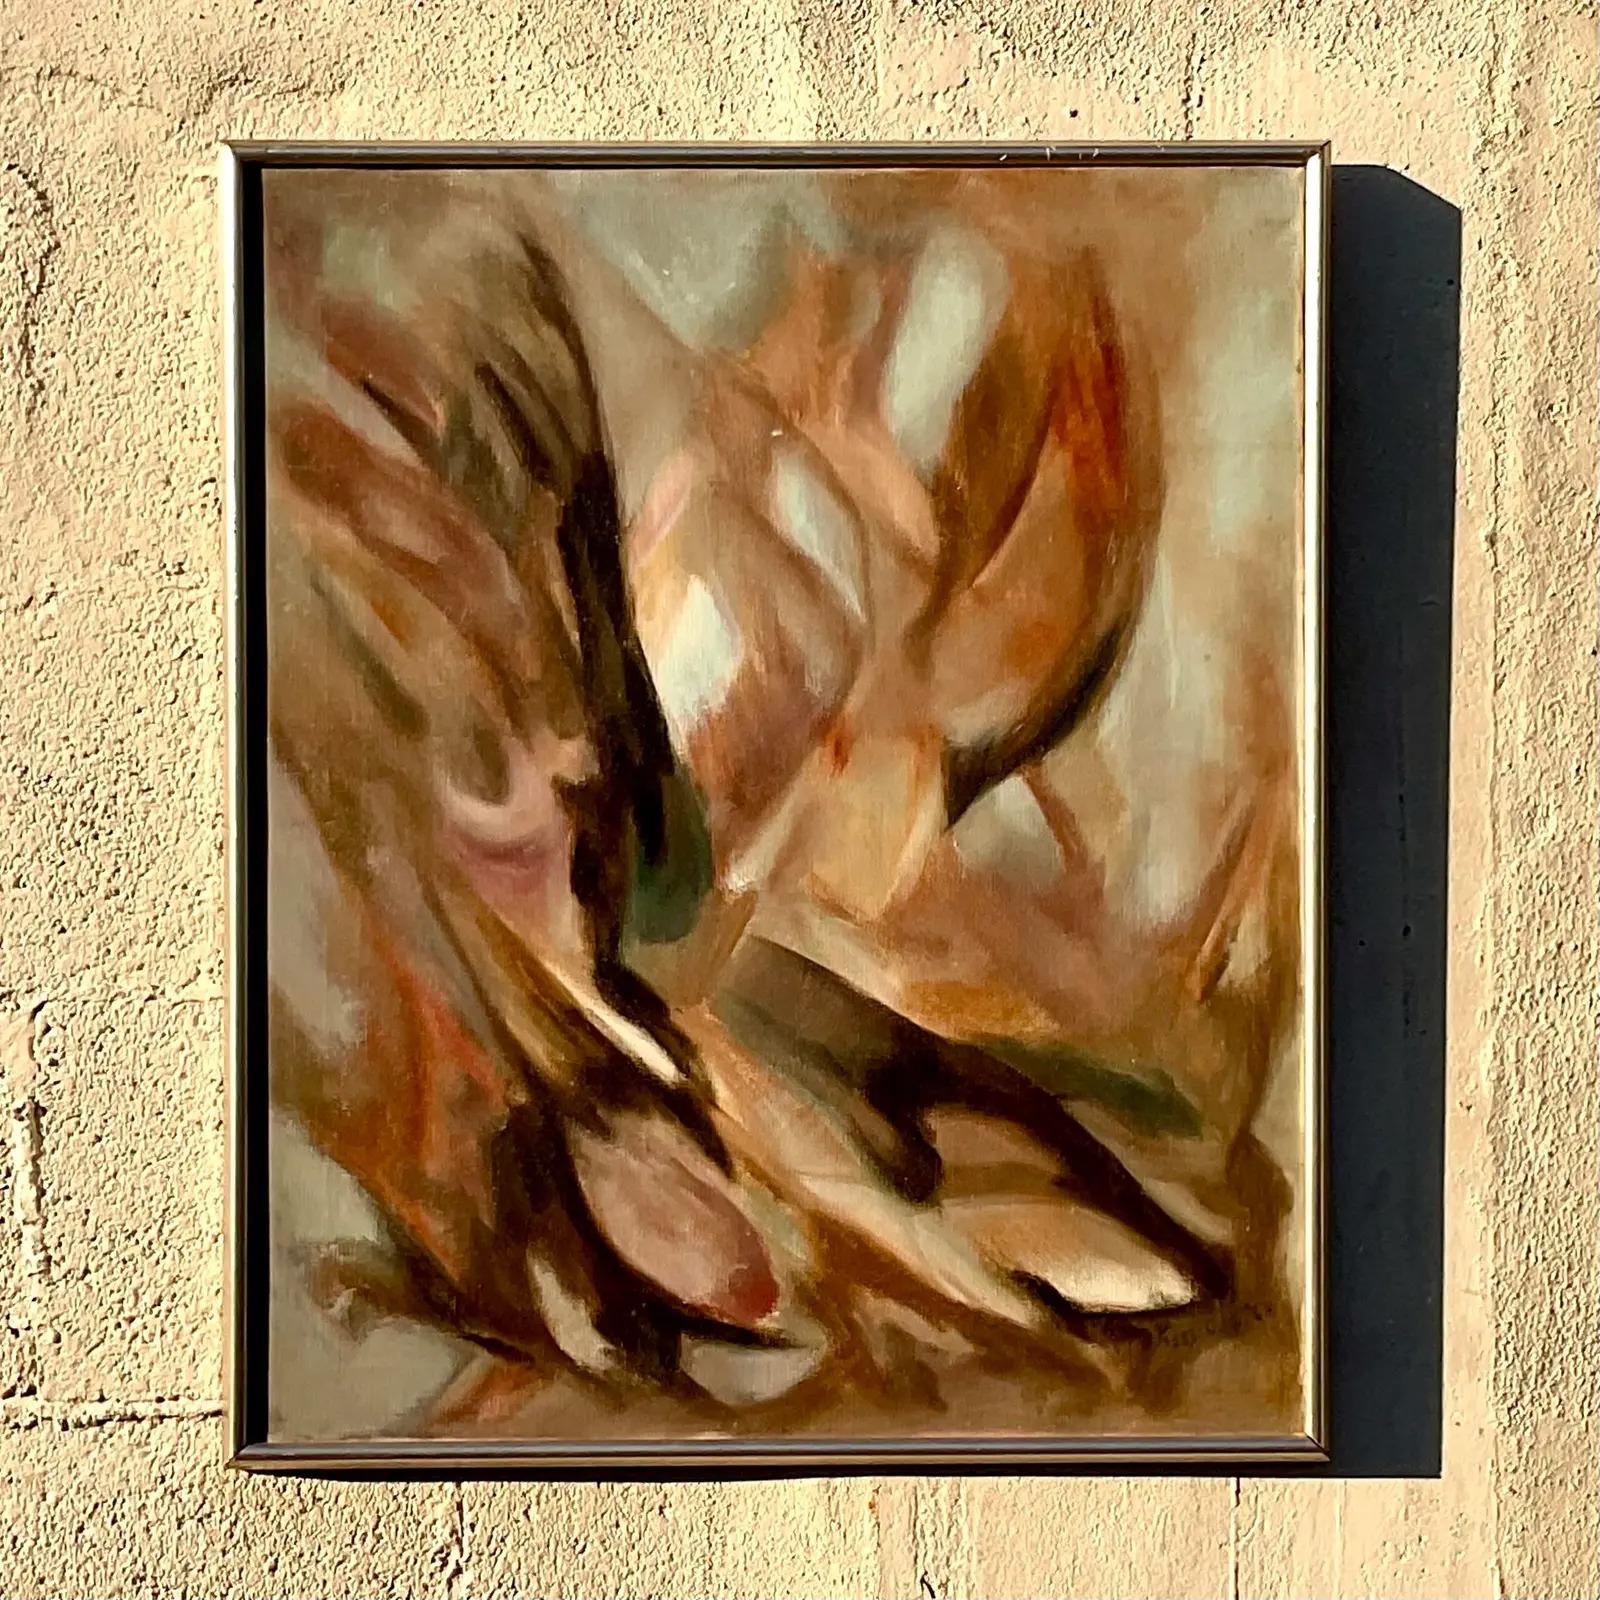 A fantastic vintage Boho original oil painting. A beautiful abstract in warm muted colors. Signed and dated by the artist Ms. Peggy Cole 1960. Acquired from a Palm Beach estate.

The painting is in great vintage condition. Minor scuffs and blemishes